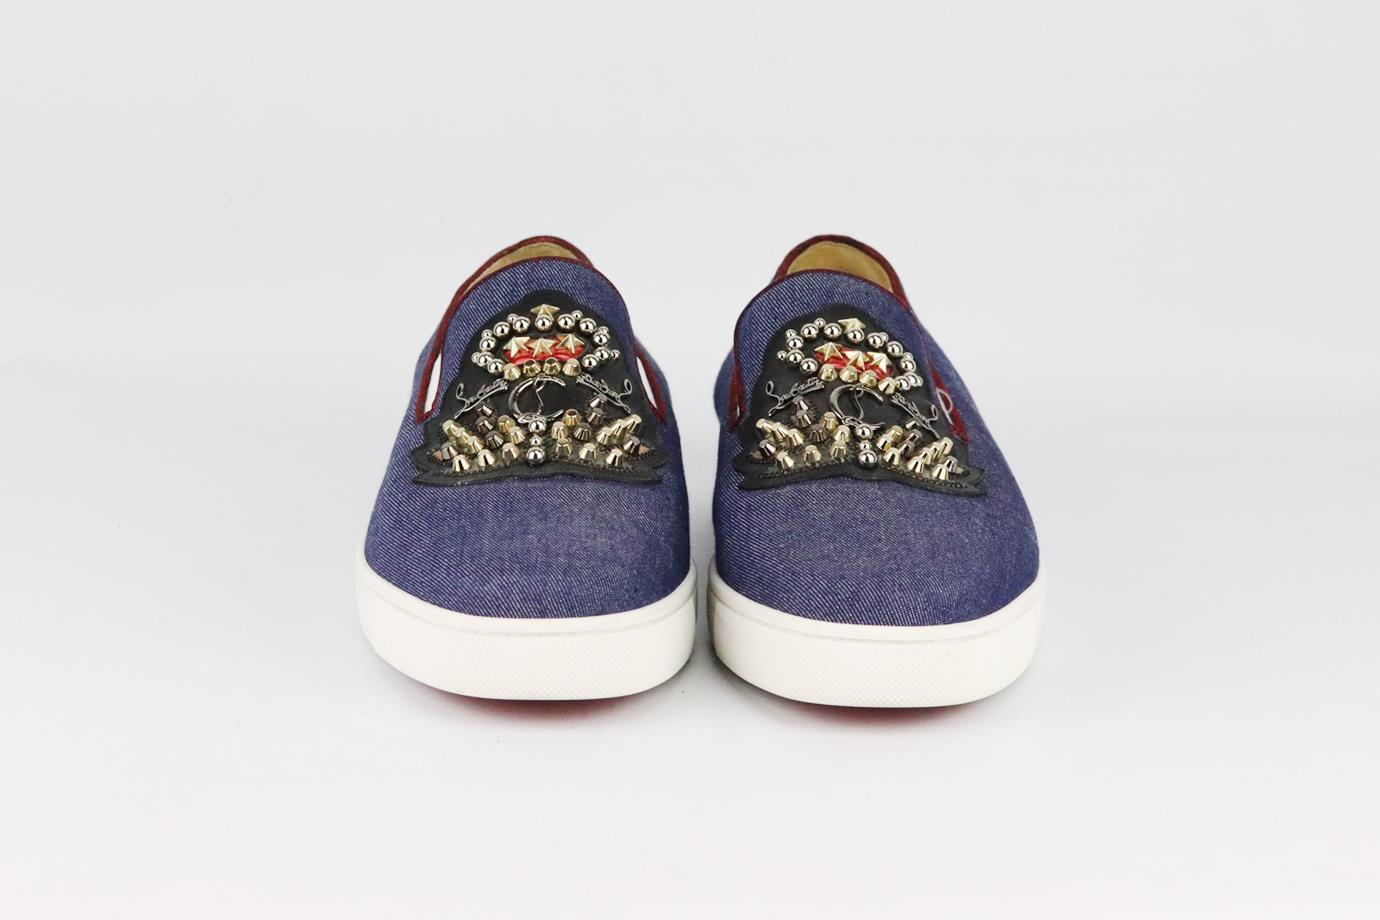 Christian Louboutin embellished denim slip on sneakers. Made from blue denim with logo embellishment on front and set on the brand’s iconic red sole. Blue. Slip on. Does not come with box or dustbag. Size: EU 43.5 (UK 9.5, US 10.5). Insole: 11.3 in.